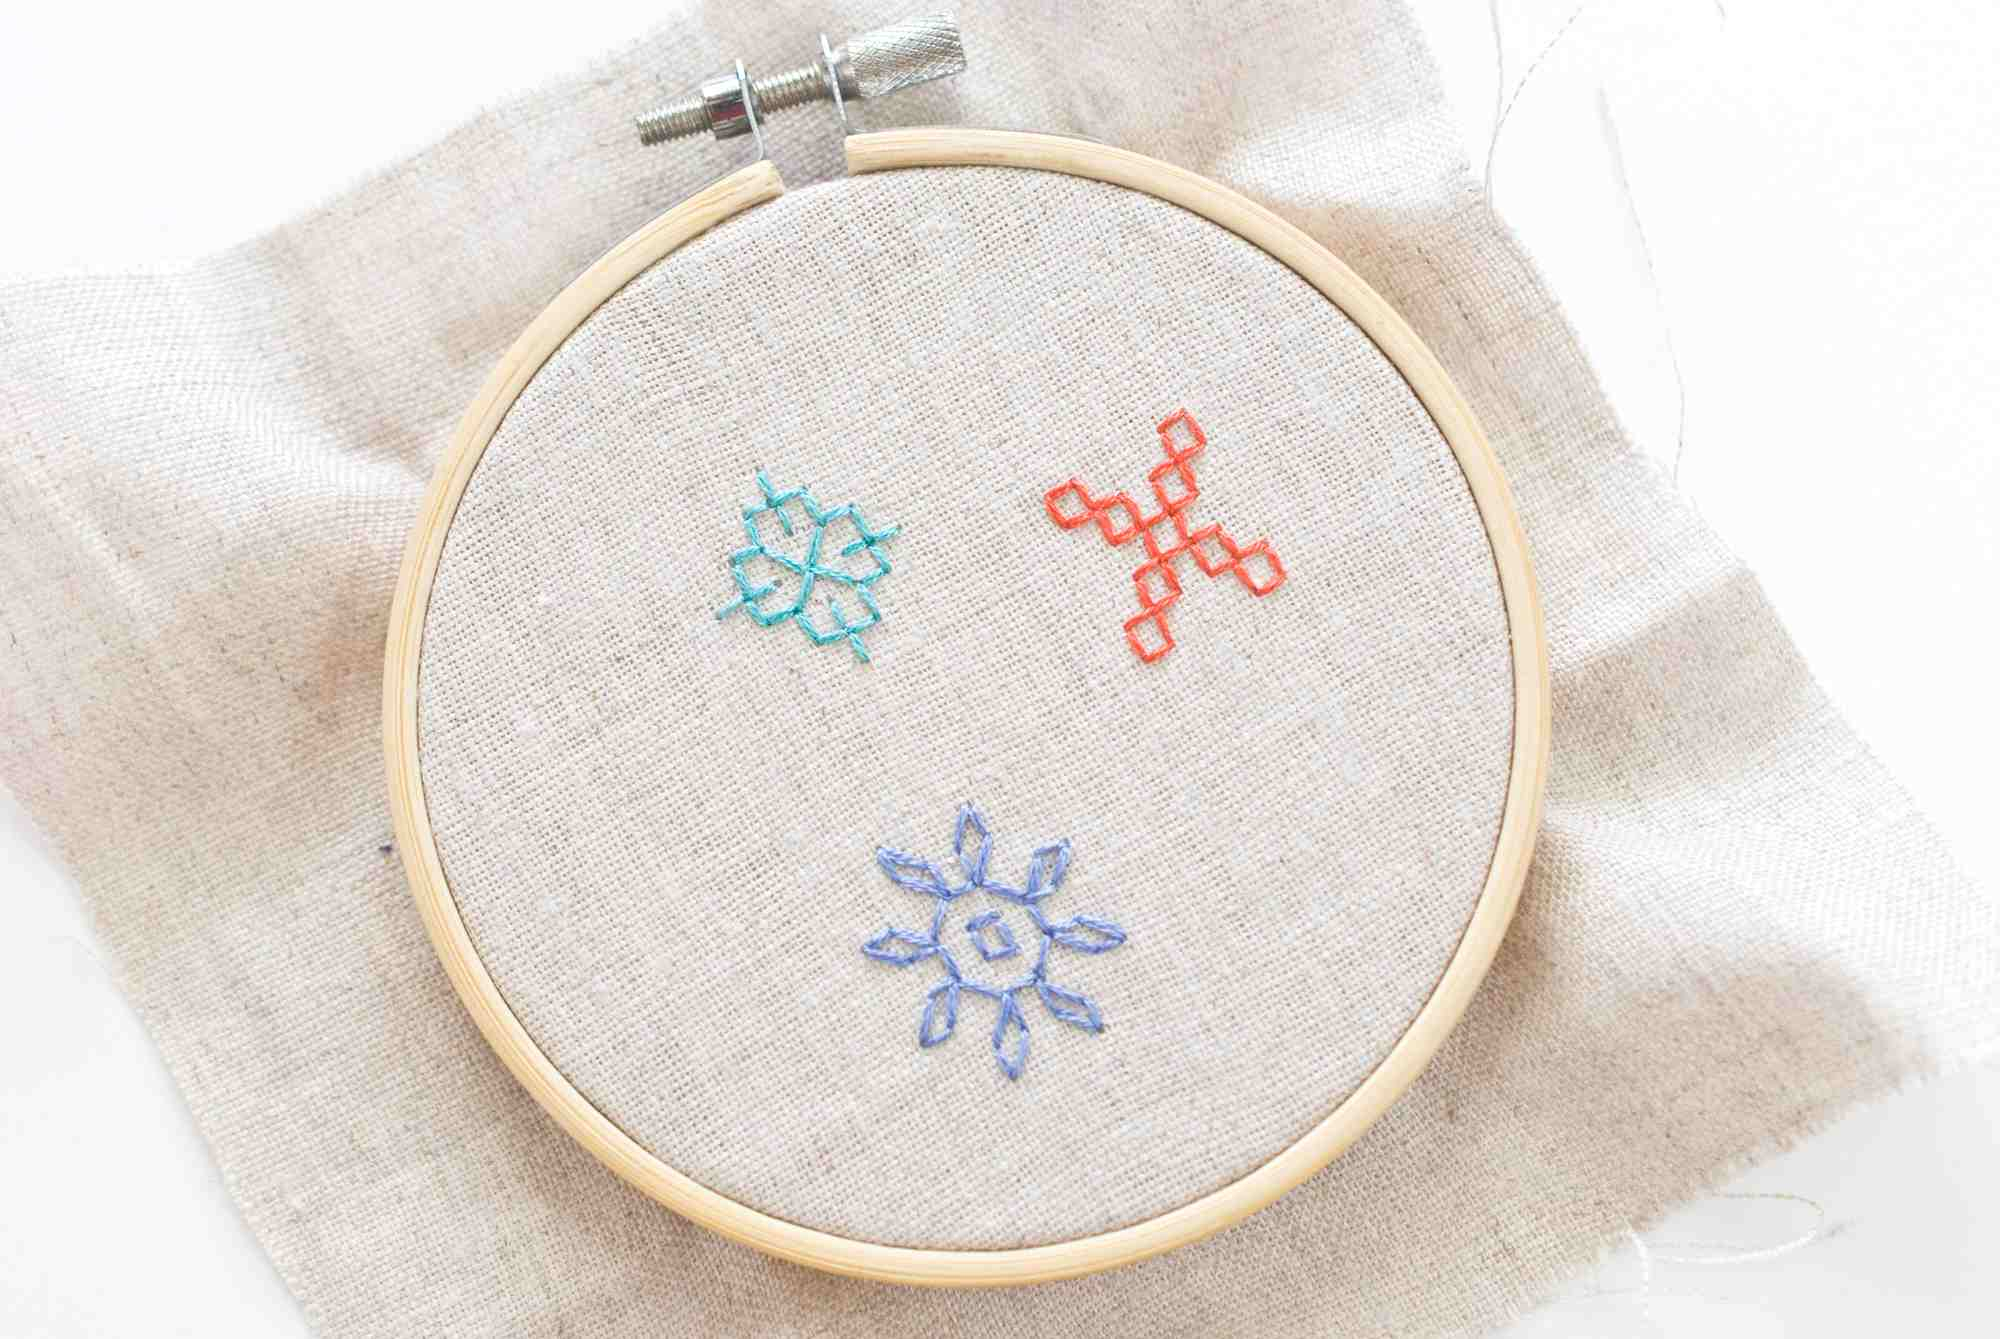 Russian Embroidery Patterns How To Do Kasuti Embroidery